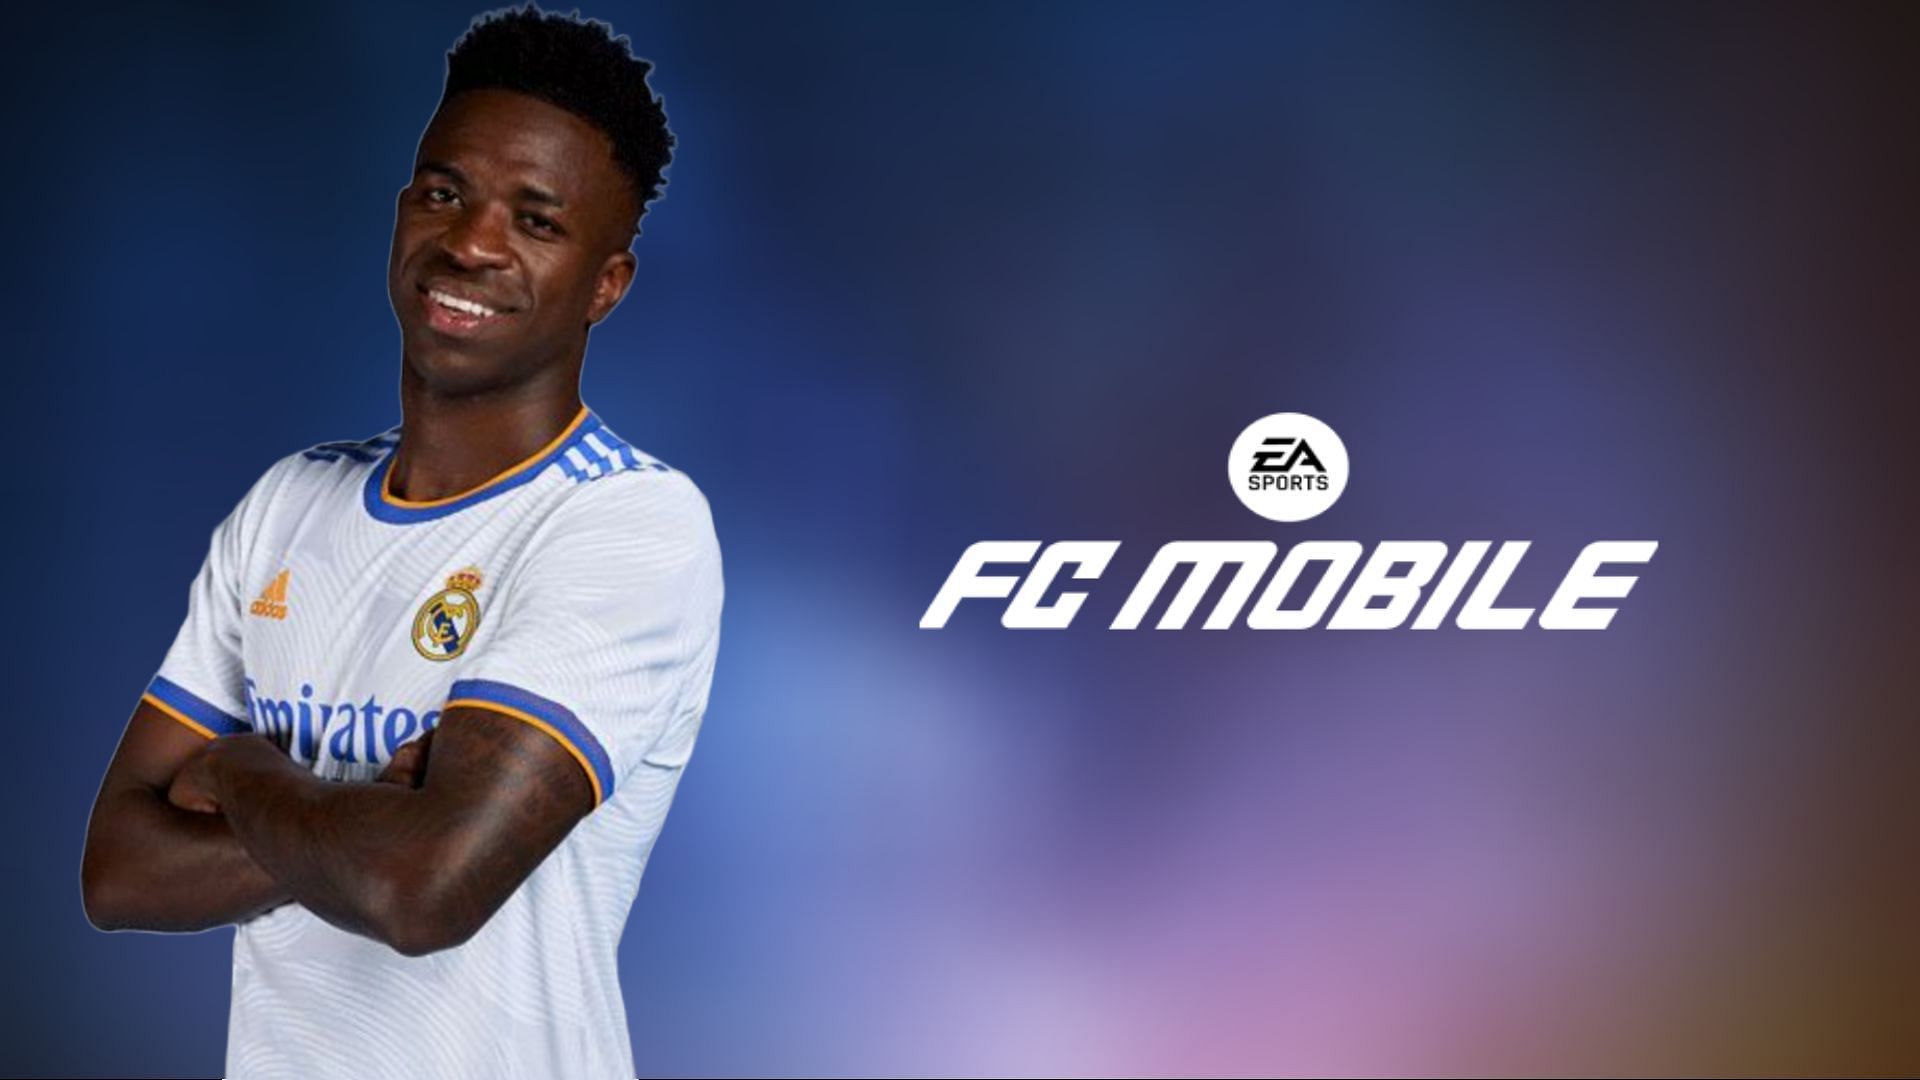 EA FC Mobile release is here with free Founder pack and new UEFA